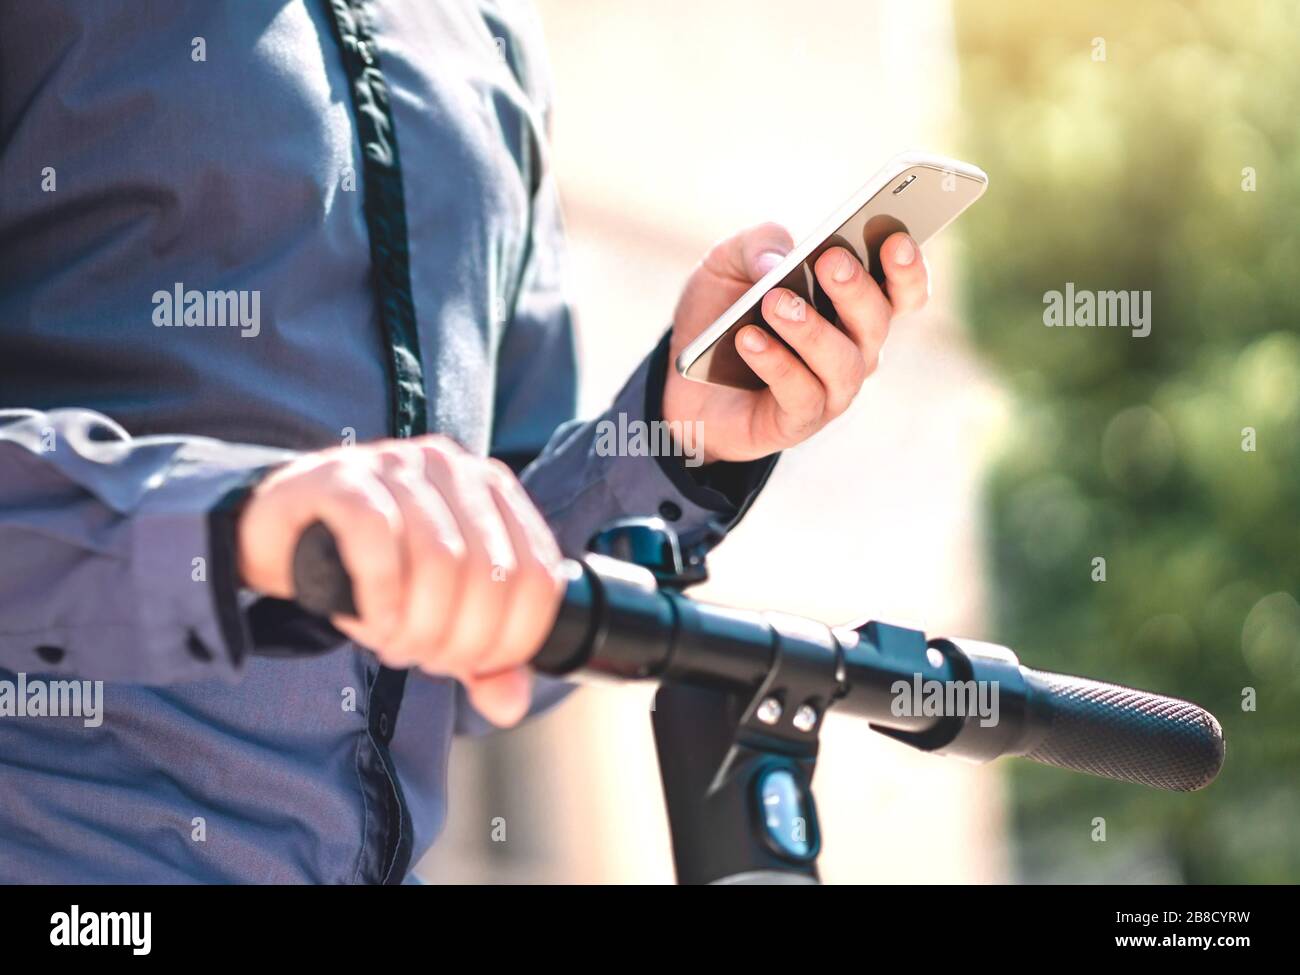 Electric kick scooter rental app in phone. Man using smartphone to rent an e vehicle to commute. Mobile application for eco transportation. Stock Photo